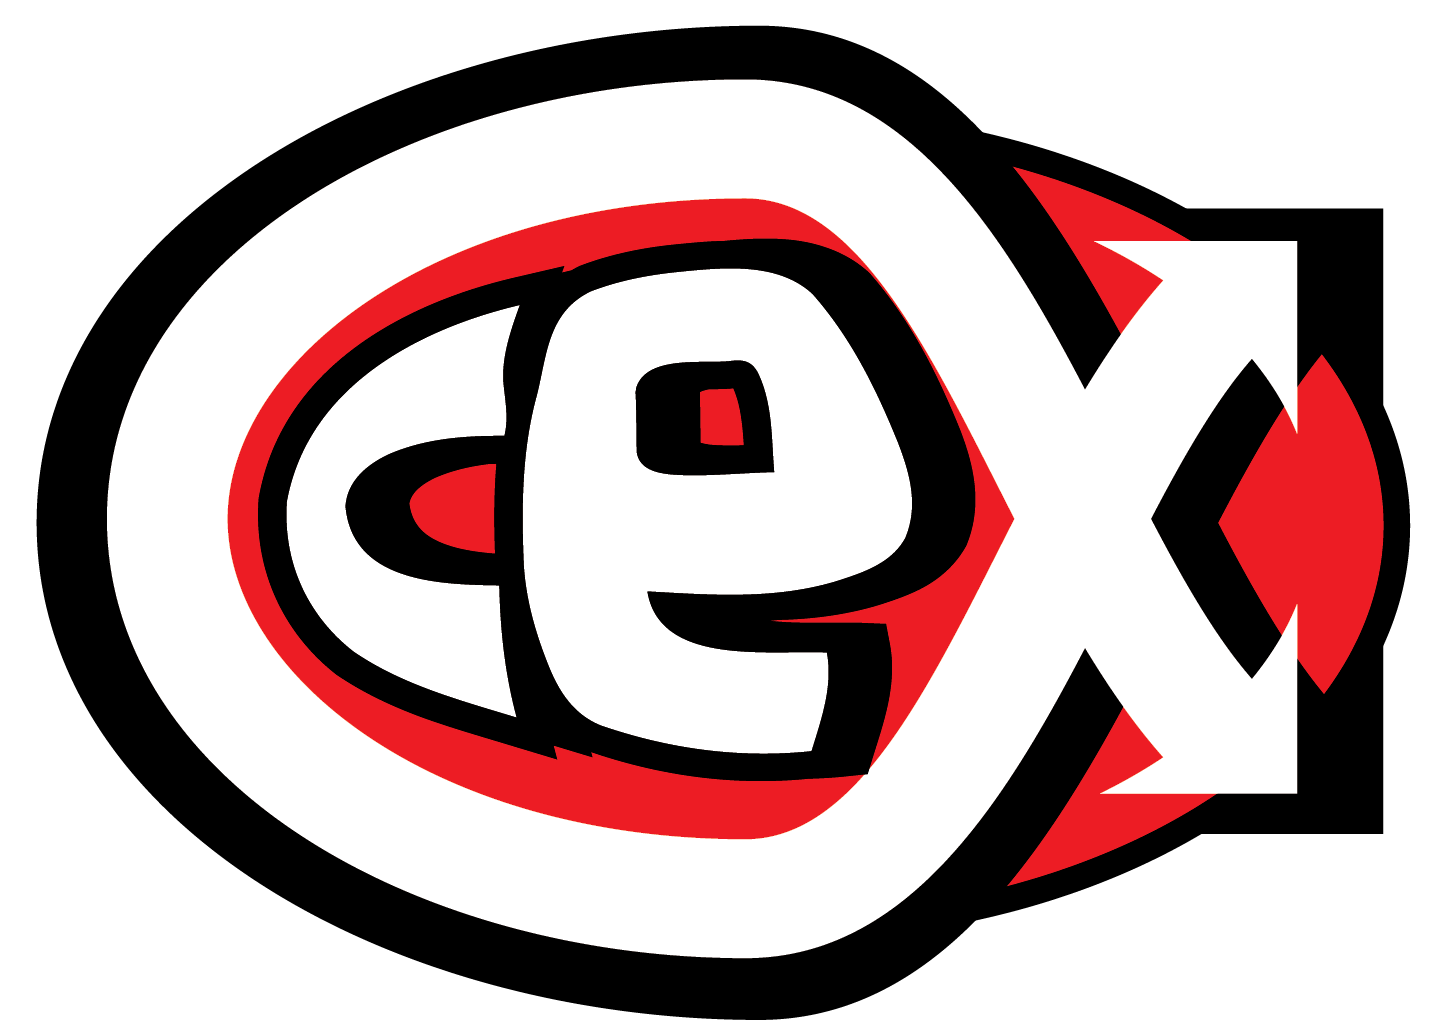 CeX (AU) Buy & Sell Games, Phones, DVDs, Blu-ray, Electronics ...